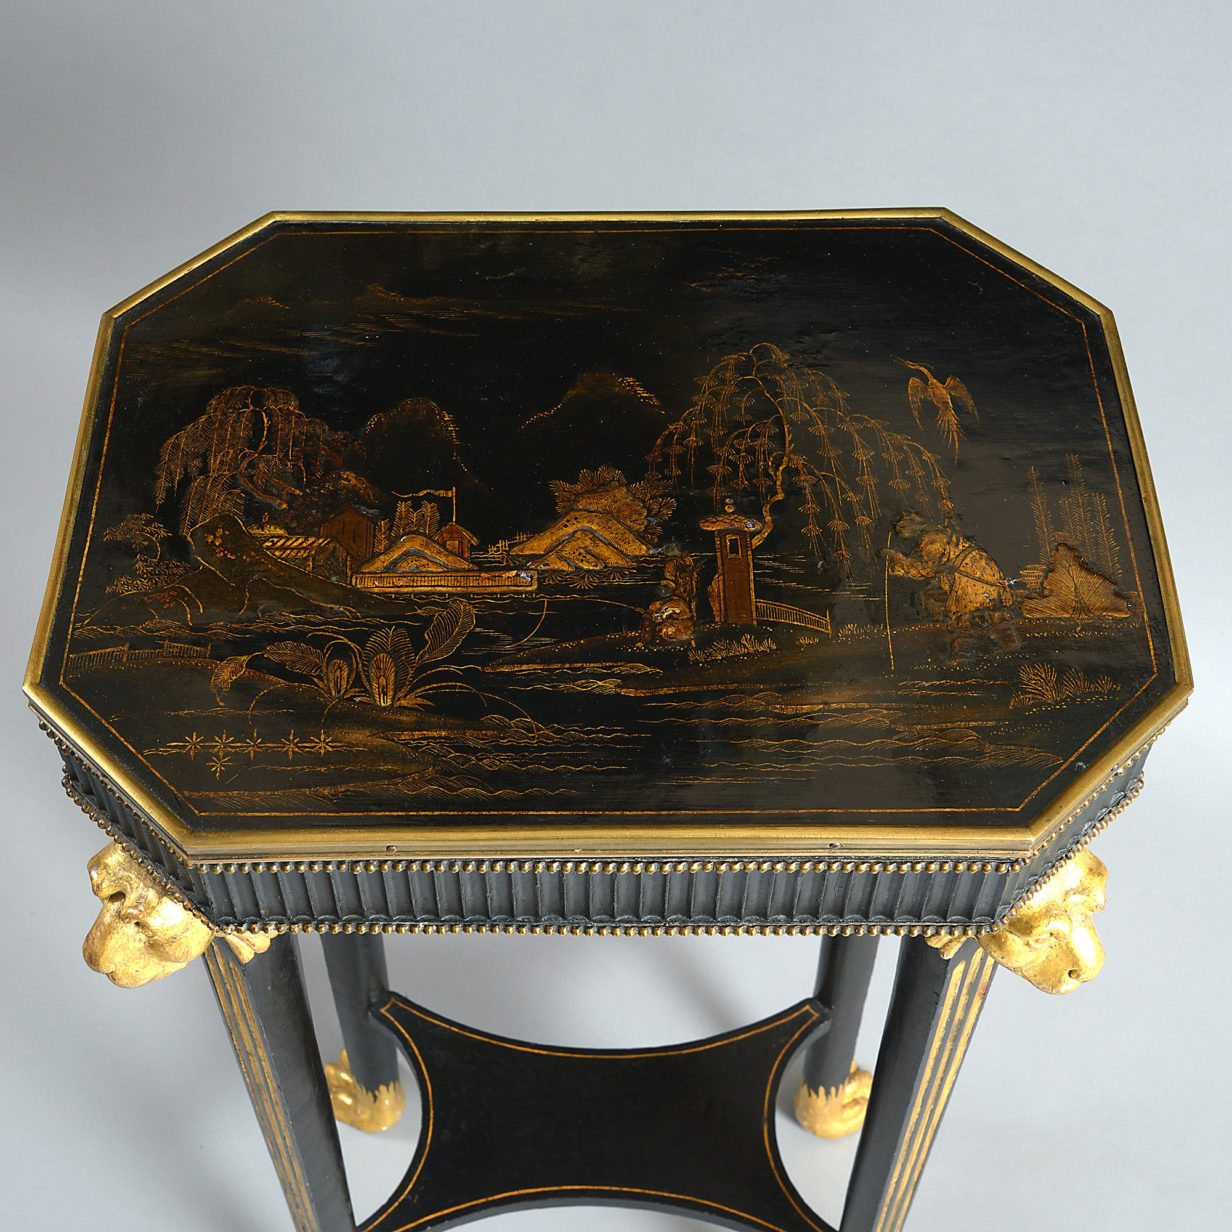 An early 19th century regency period occasional table